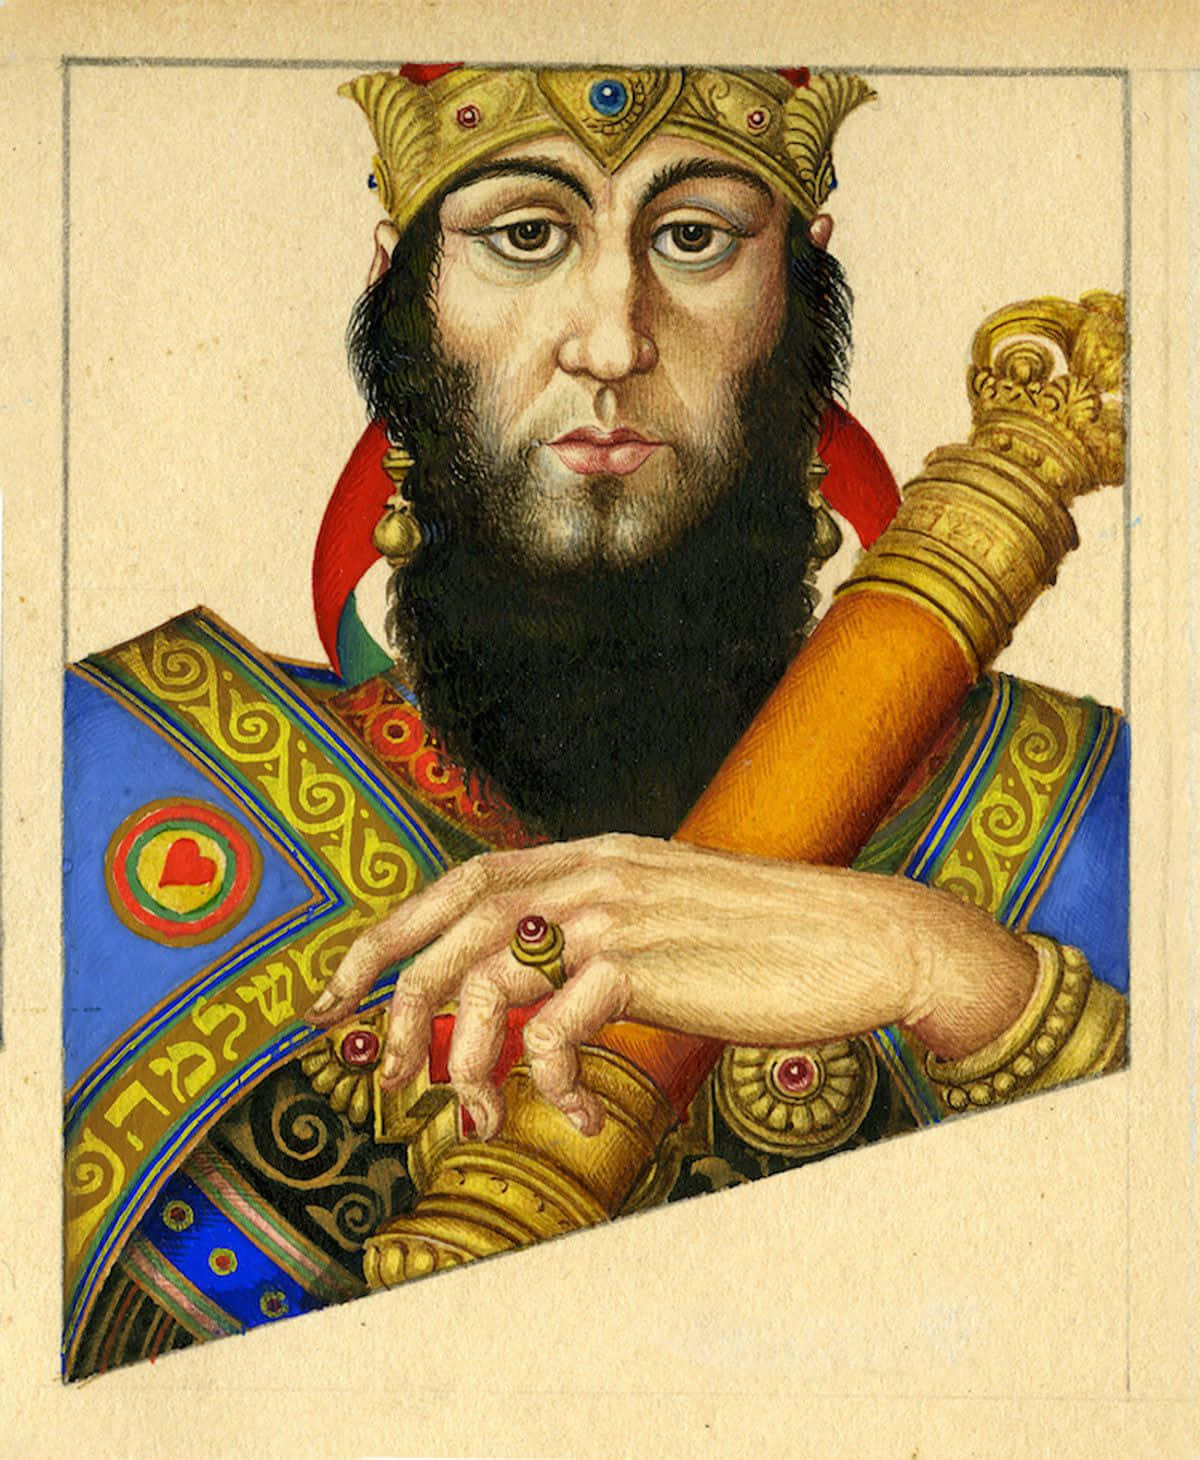 King Solomon was renowned for his wisdom and wealth in the 10th century BC.